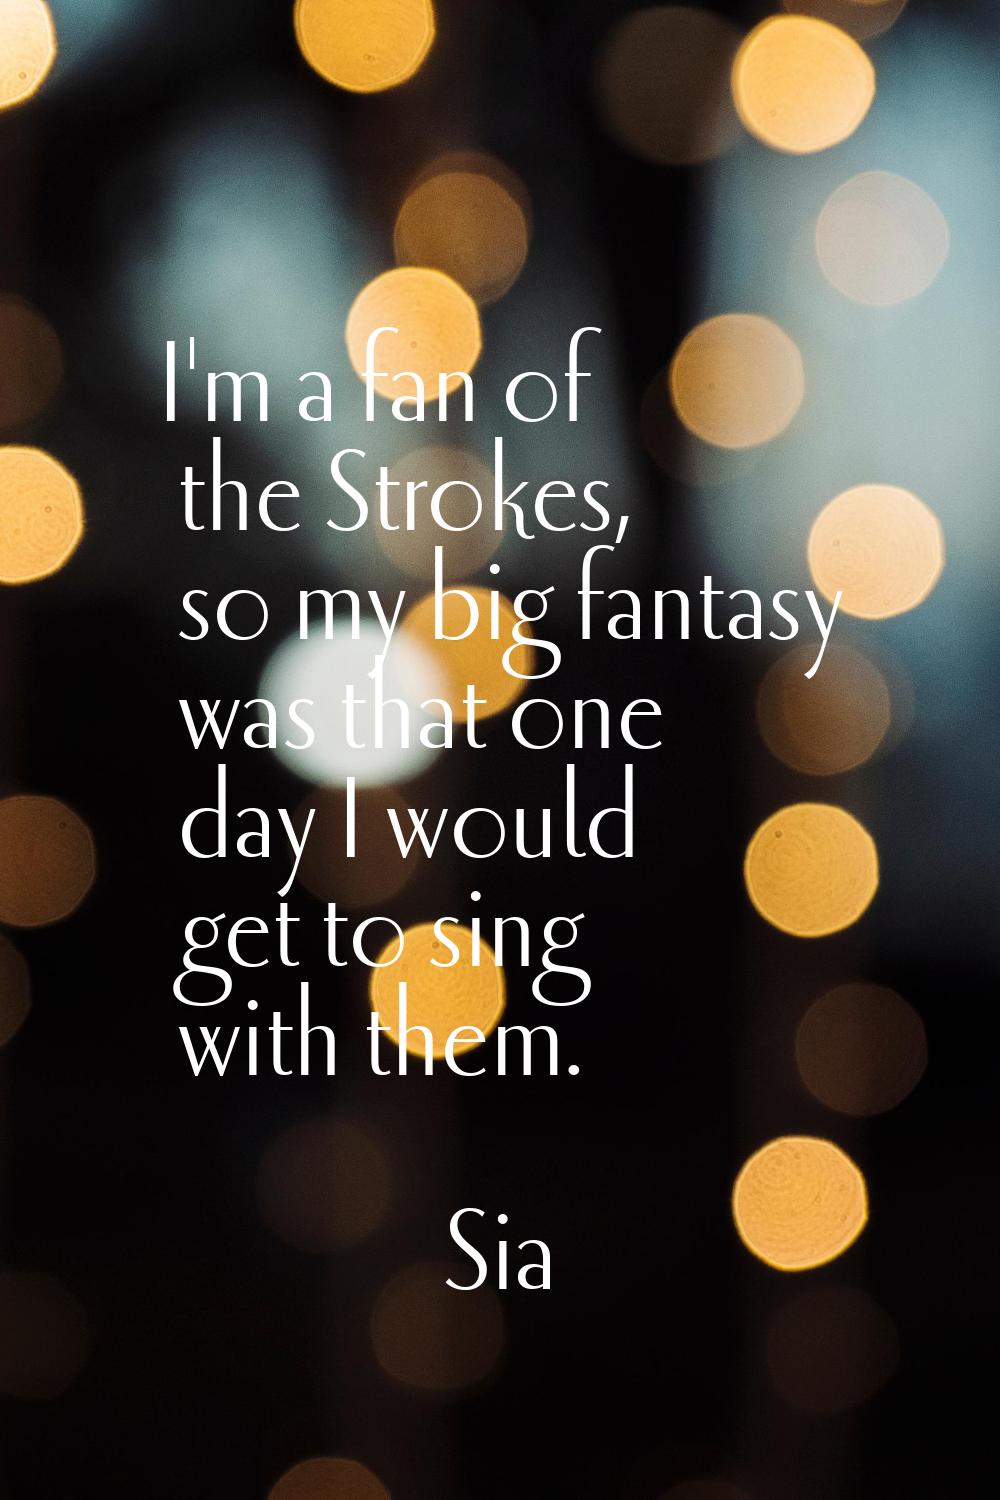 I'm a fan of the Strokes, so my big fantasy was that one day I would get to sing with them.